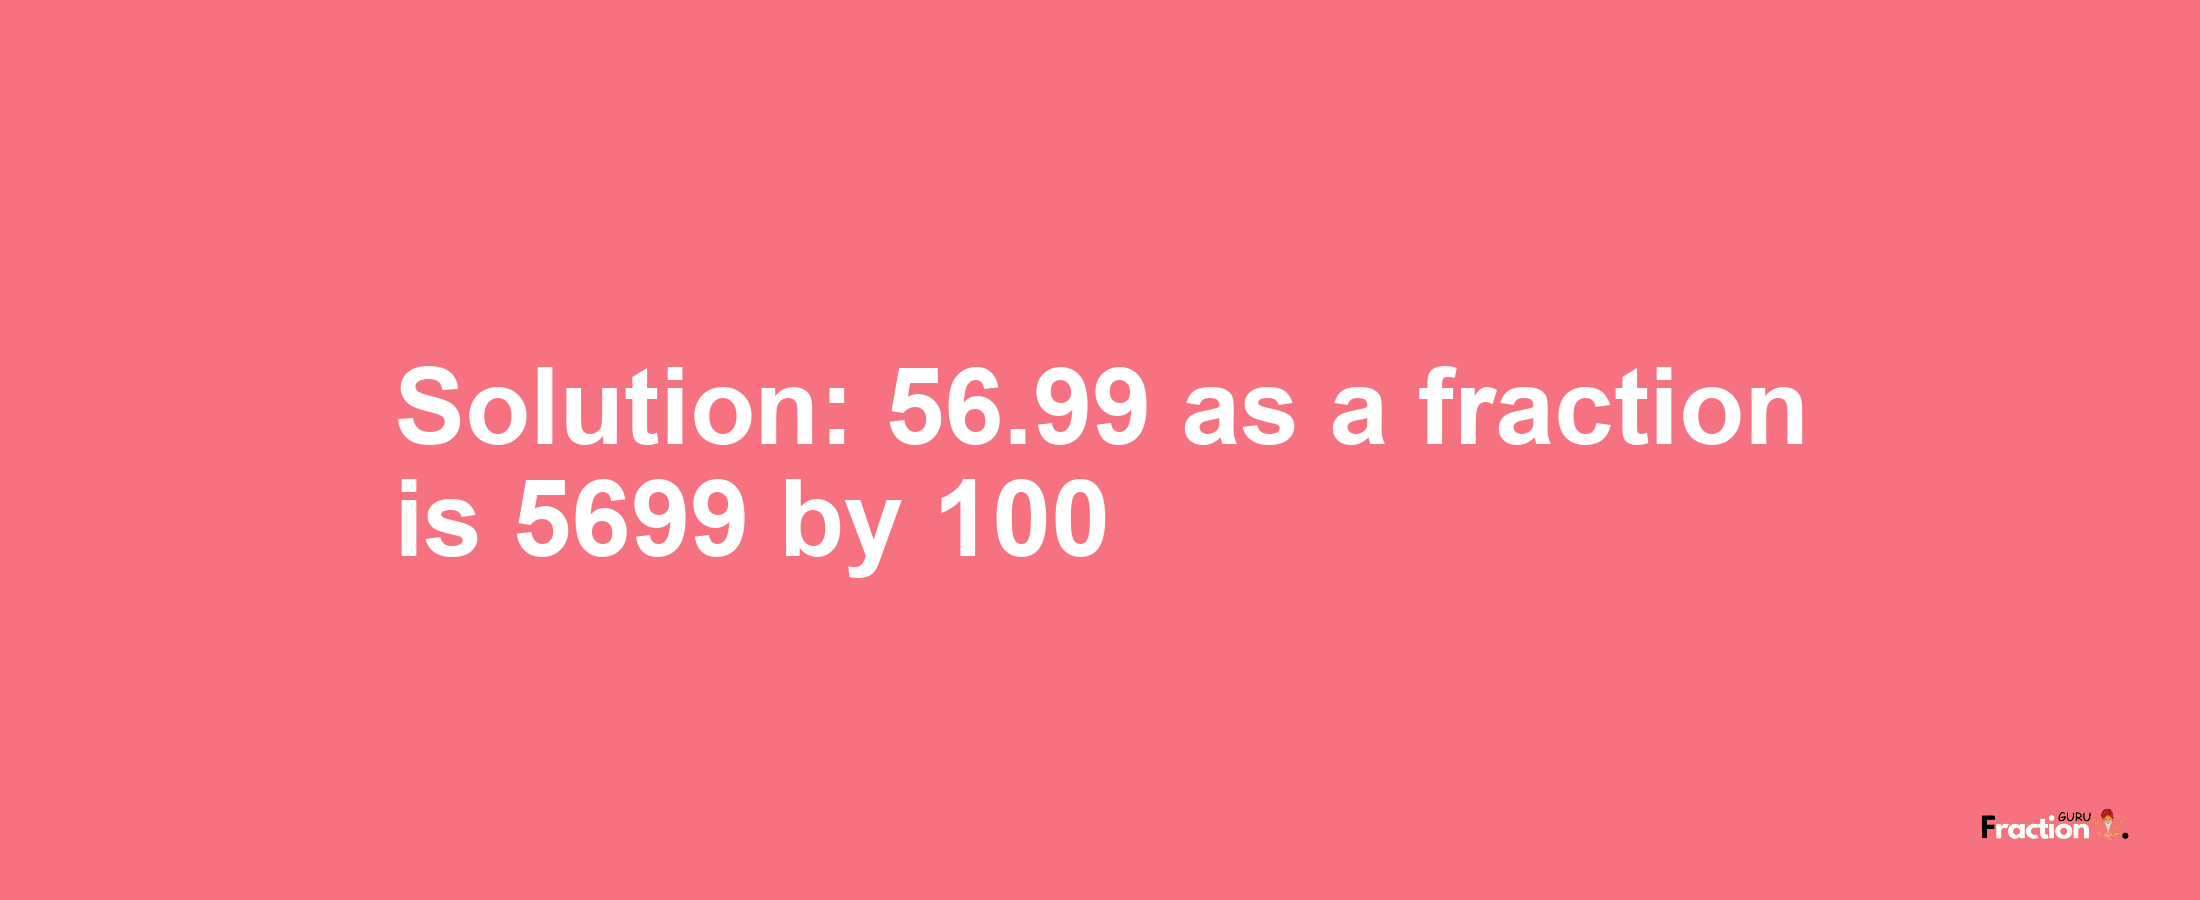 Solution:56.99 as a fraction is 5699/100